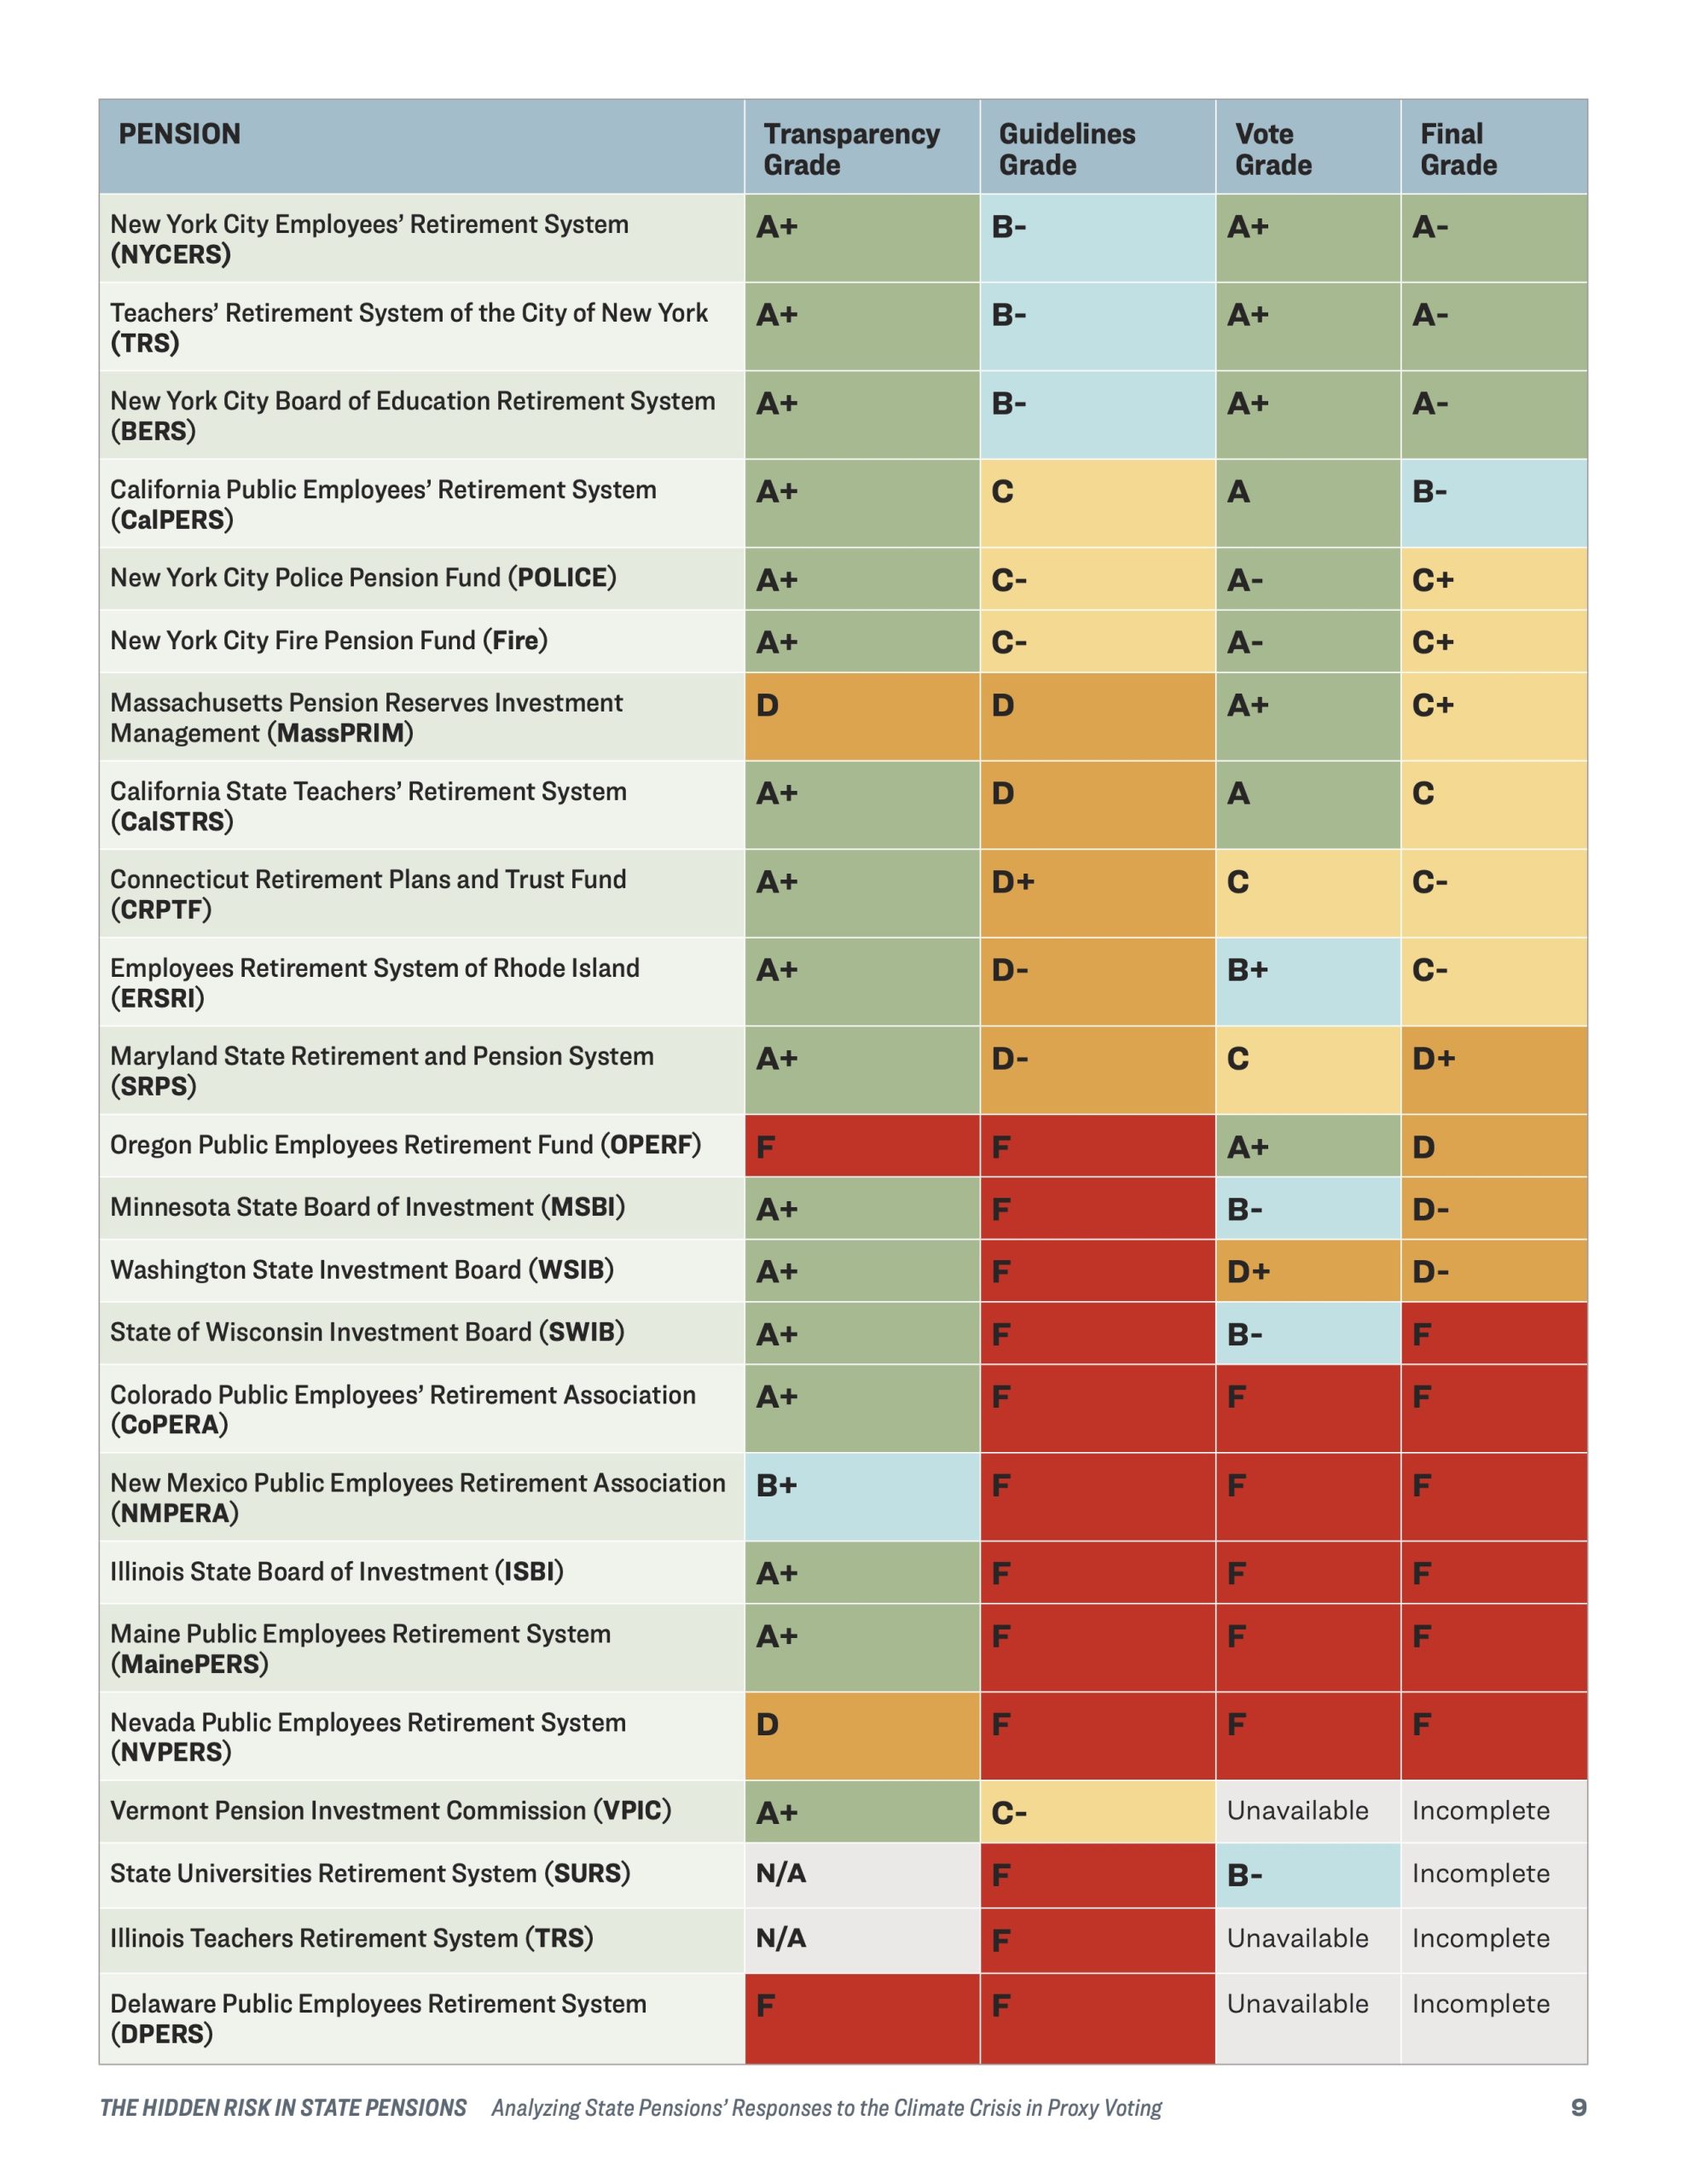 Scorecard of 24 public US pension funds' grades for three categories of proxy voting, guidelines, and transparency. Ranked by grades color-coded respectively for: A (green); B (blue); C (yellow); D (orange); F (red)